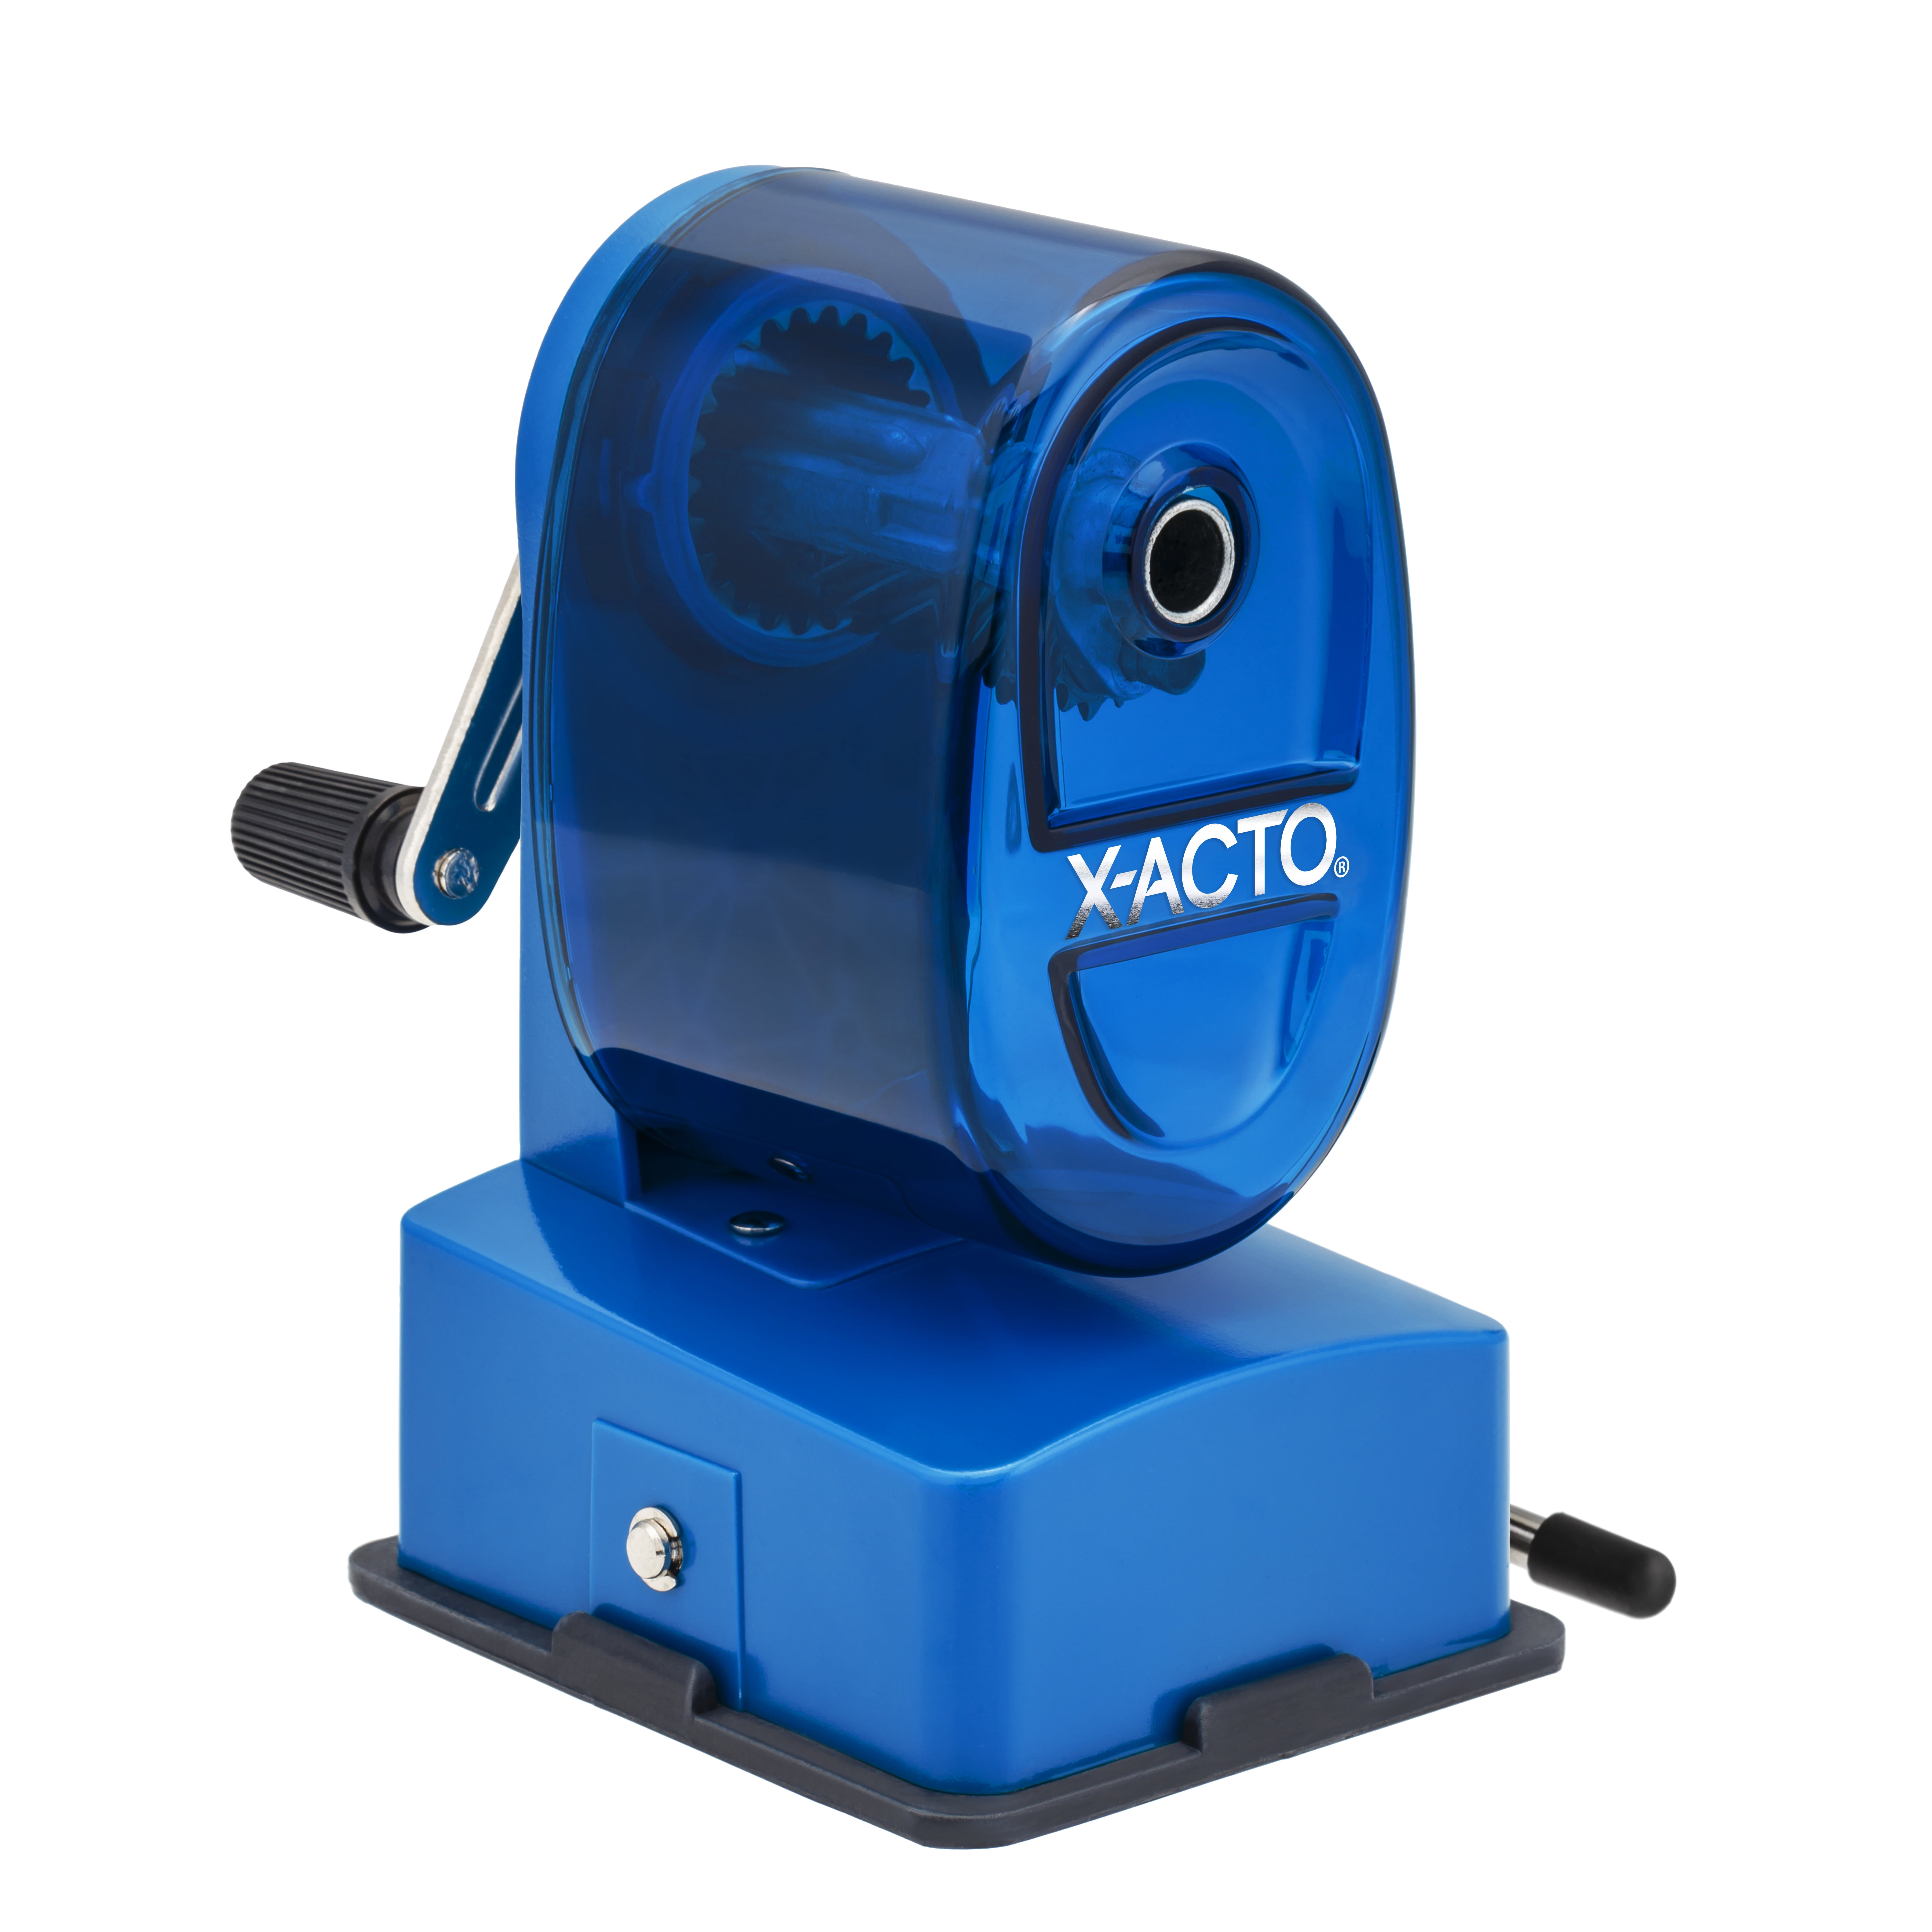 Details about   X-ACTO Manual Pencil Sharpener Bulldog Vacuum Mount Home Classroom Colors Vary 